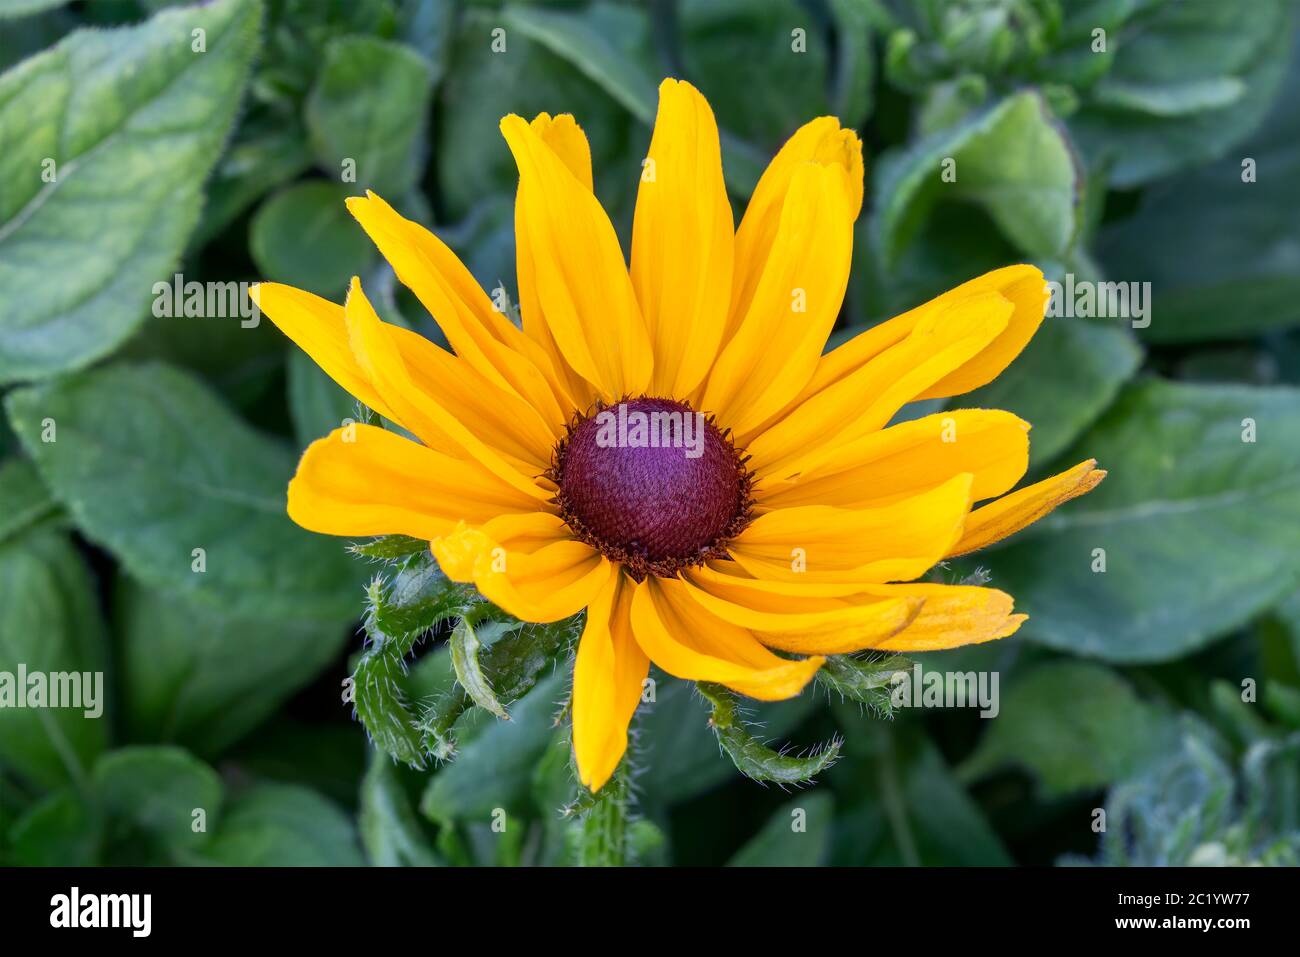 Rudbeckia hirta 'Denver Daisy' a yellow orange herbaceous perennial summer autumn flower plant commonly known as Black Eyed Susan or Coneflower stock Stock Photo